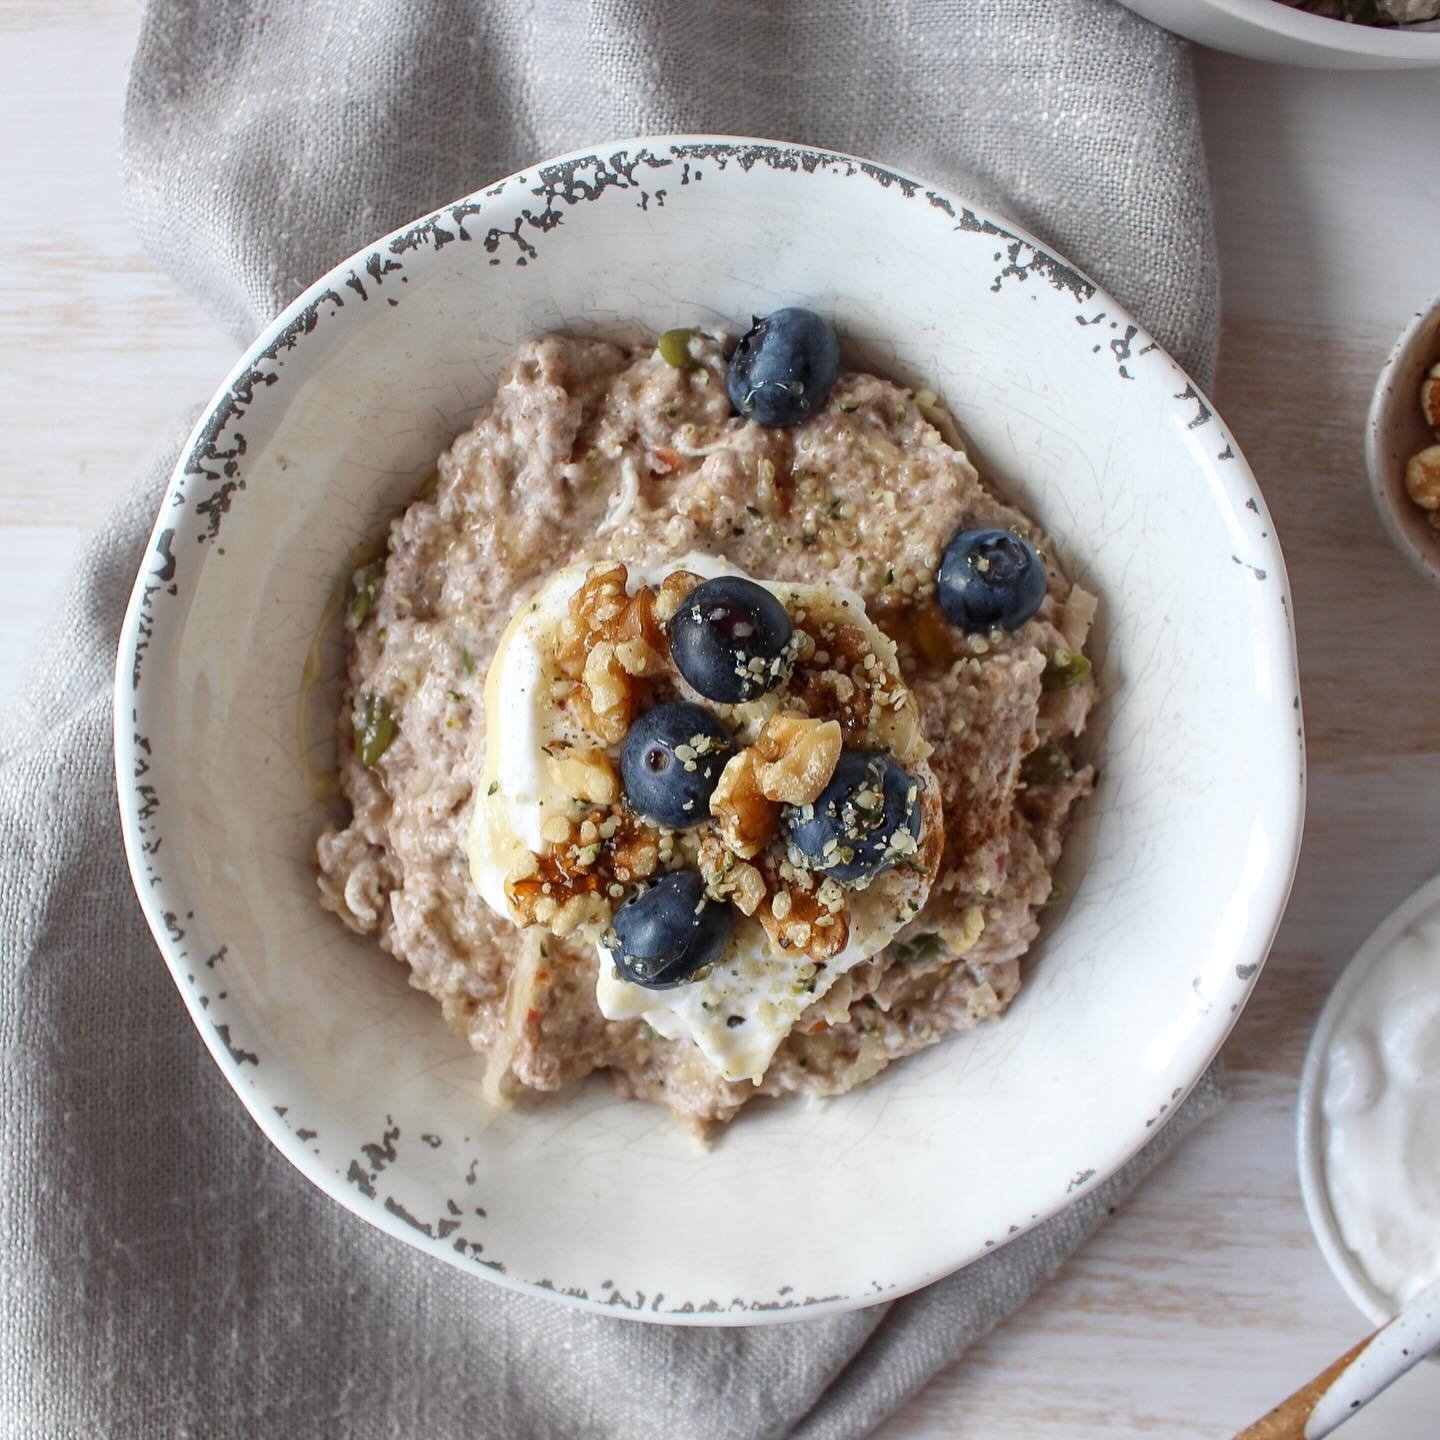 This Overnight Chia Bircher has quickly become my new favourite breakfast and is one of the easiest ways to make sure your day is phytoestrogen and fibre rich, making it incredible for your hormones, gut health, skin and more! 🥳

This is one of the 